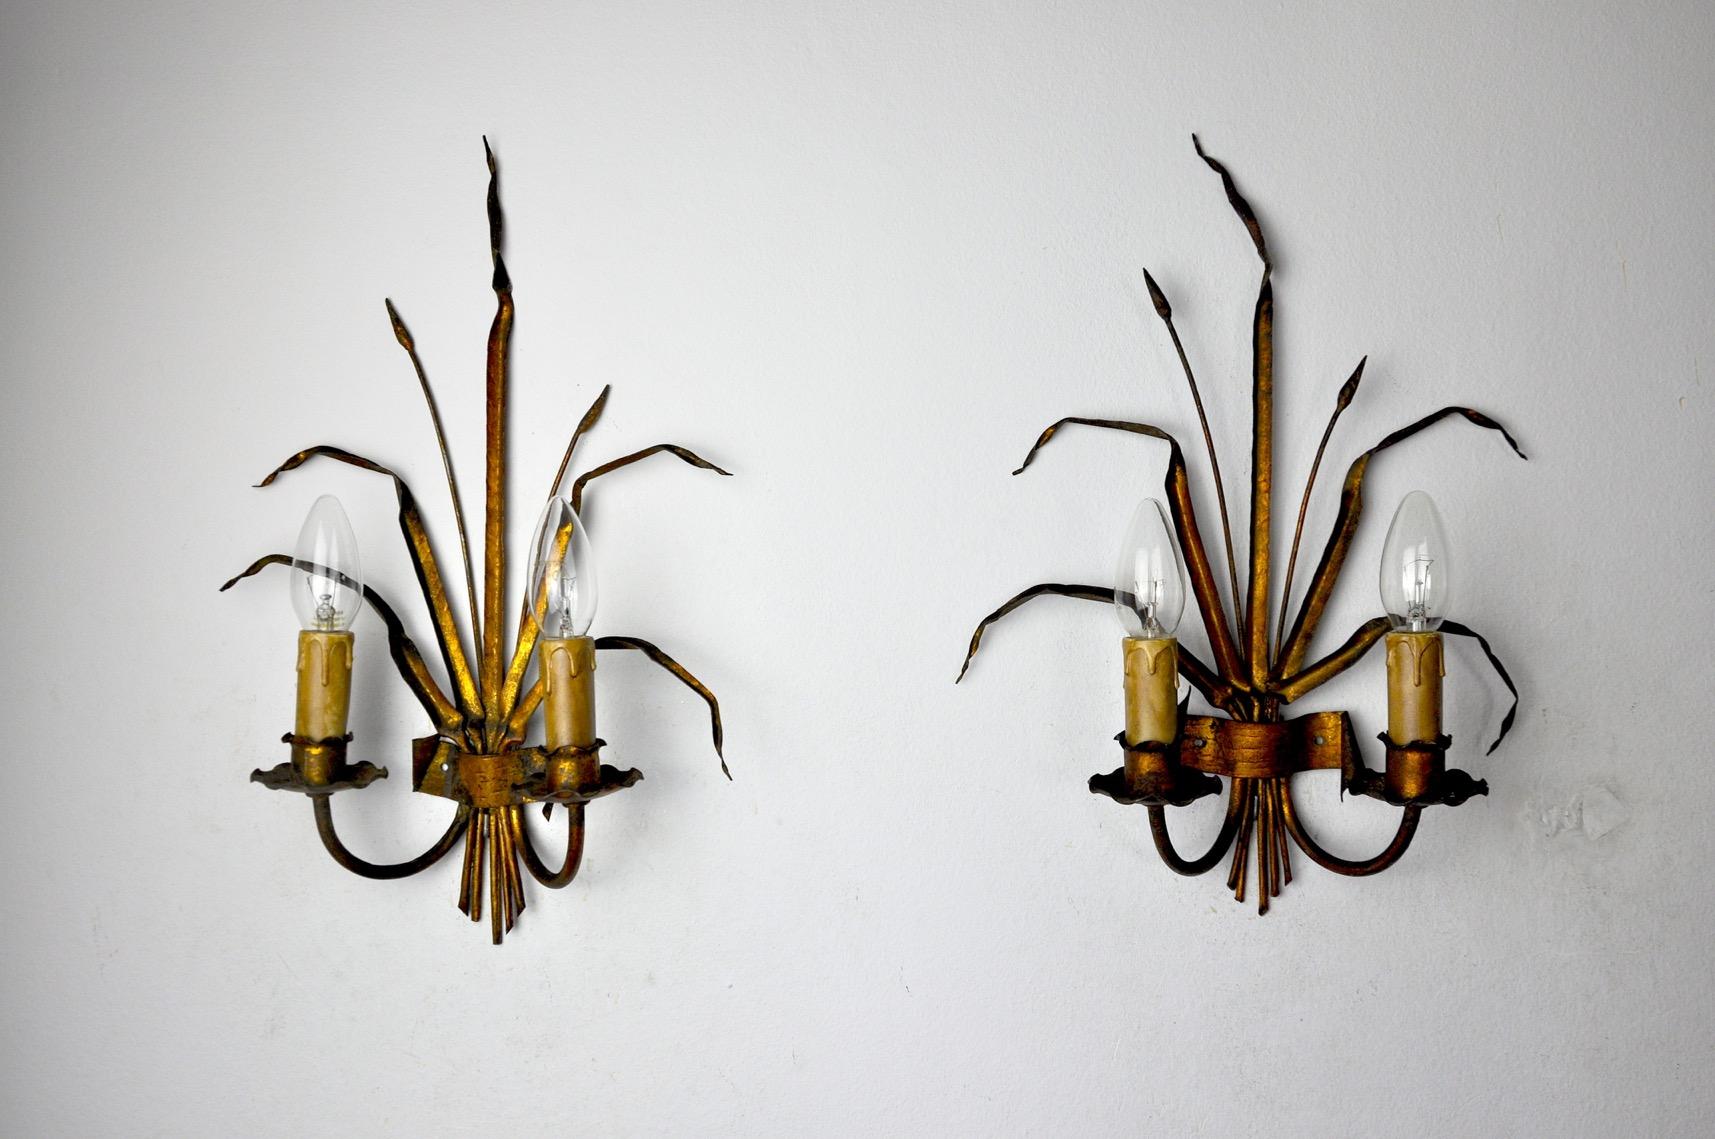 Hollywood Regency Pair of Floral Wall Lamps by Ferro Arte, Spain, circa 1960 For Sale